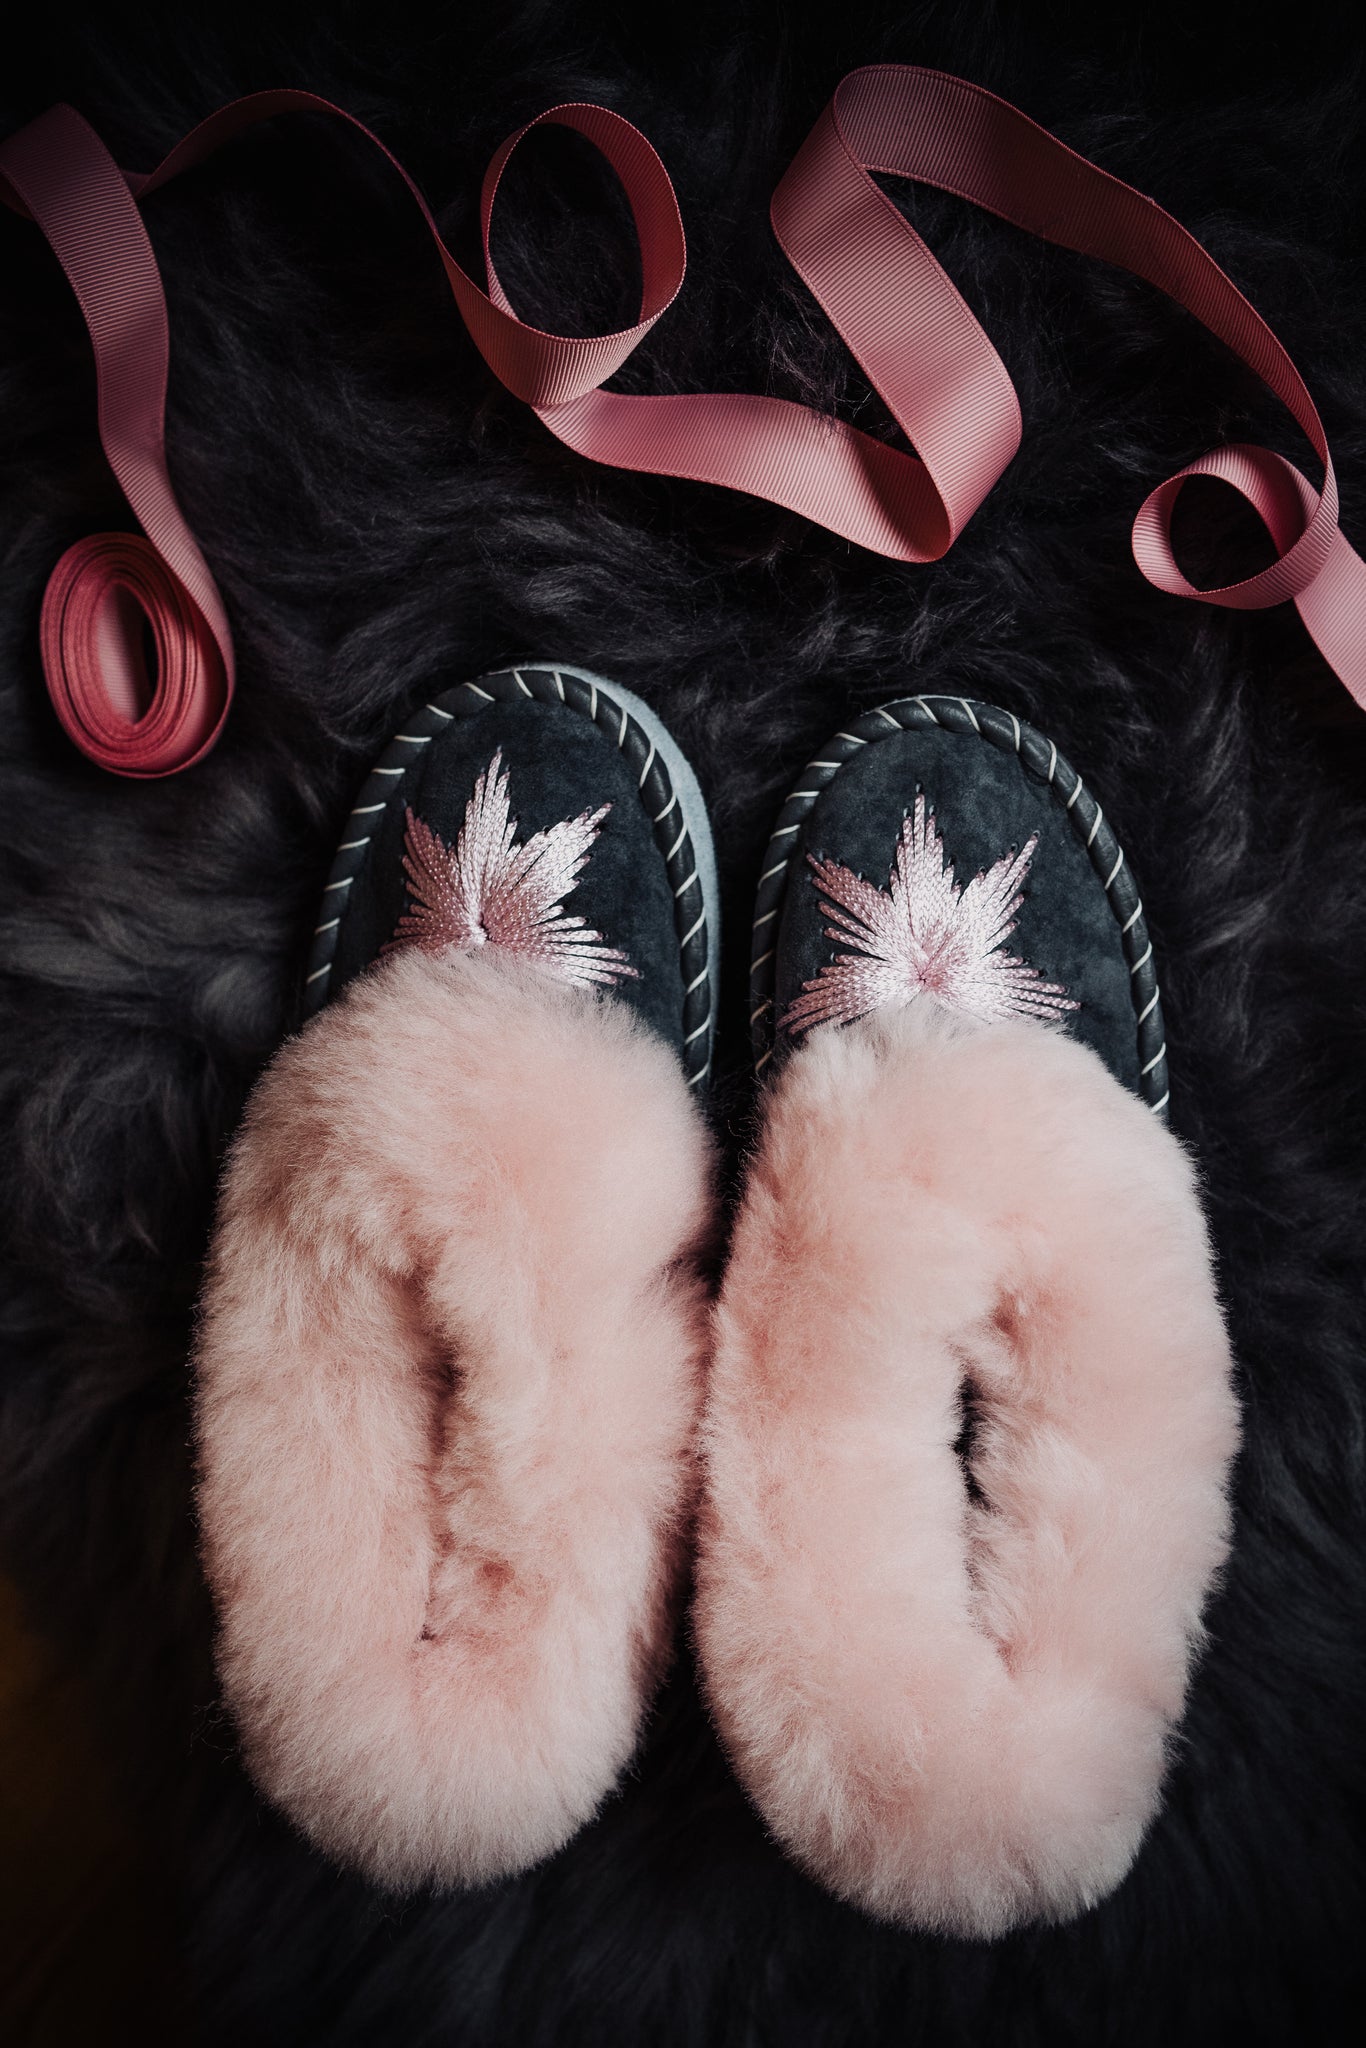  Pink candy sheepskin slippers with a pink rim and grey leather, exquisitely hand-embroidered with pink silk thread, resting on a fluffy grey sheepskin with pink ribbon decoration.